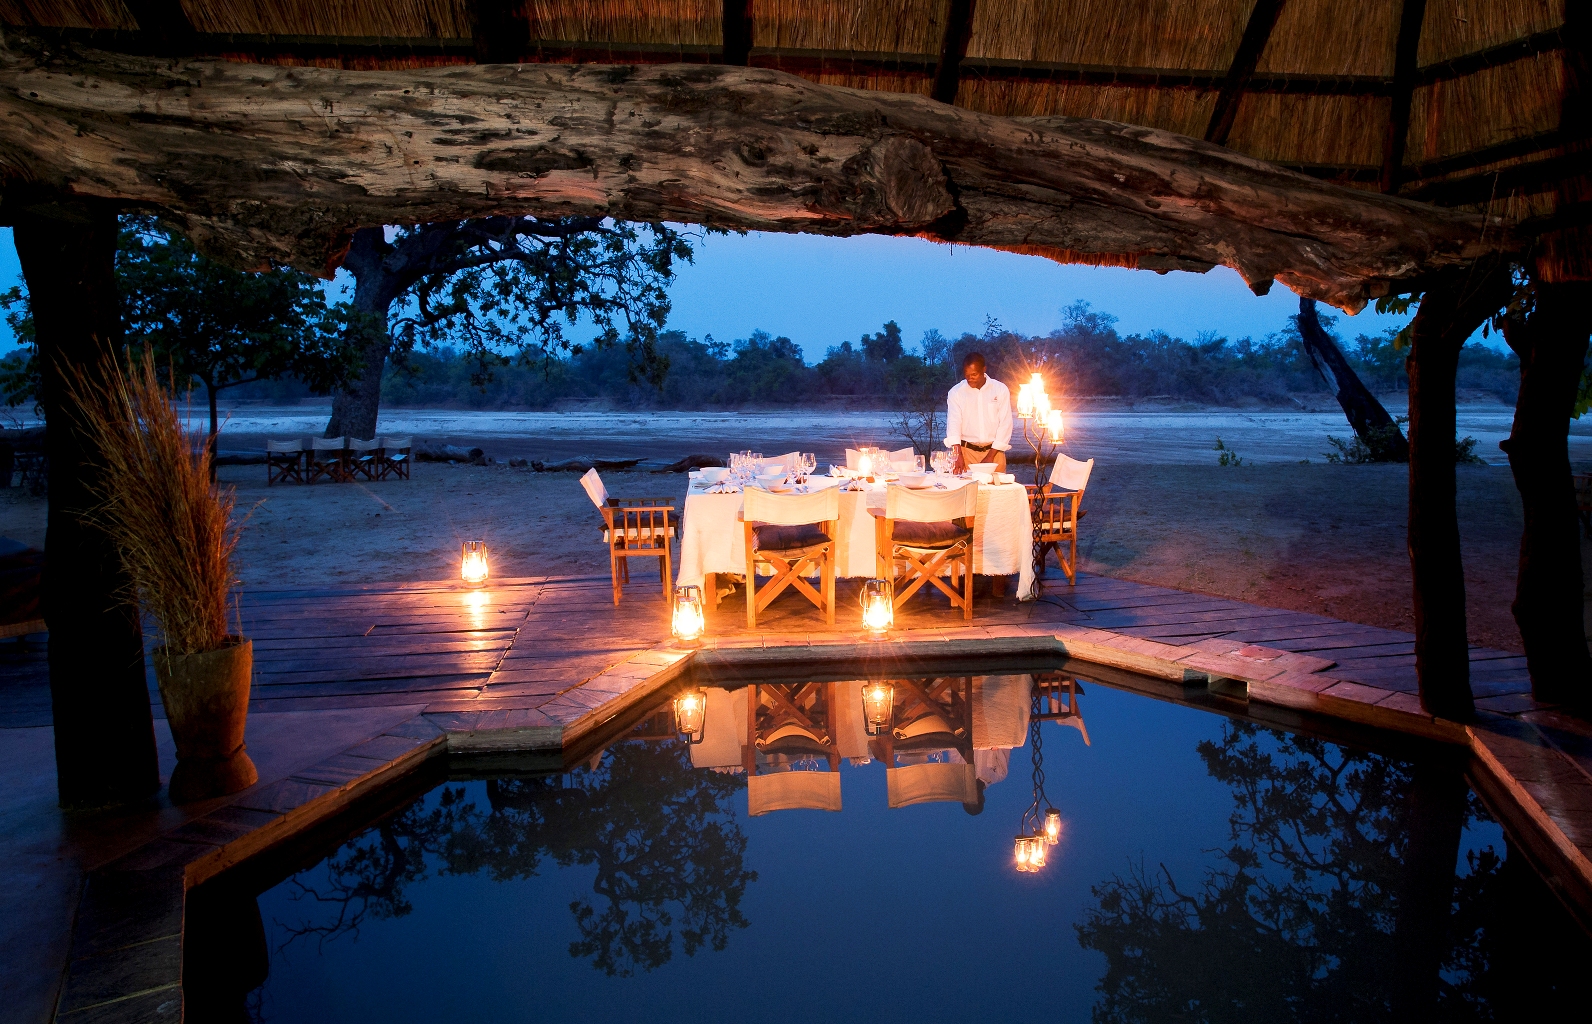 Dinner by the pool - Mchenja Bush Camp